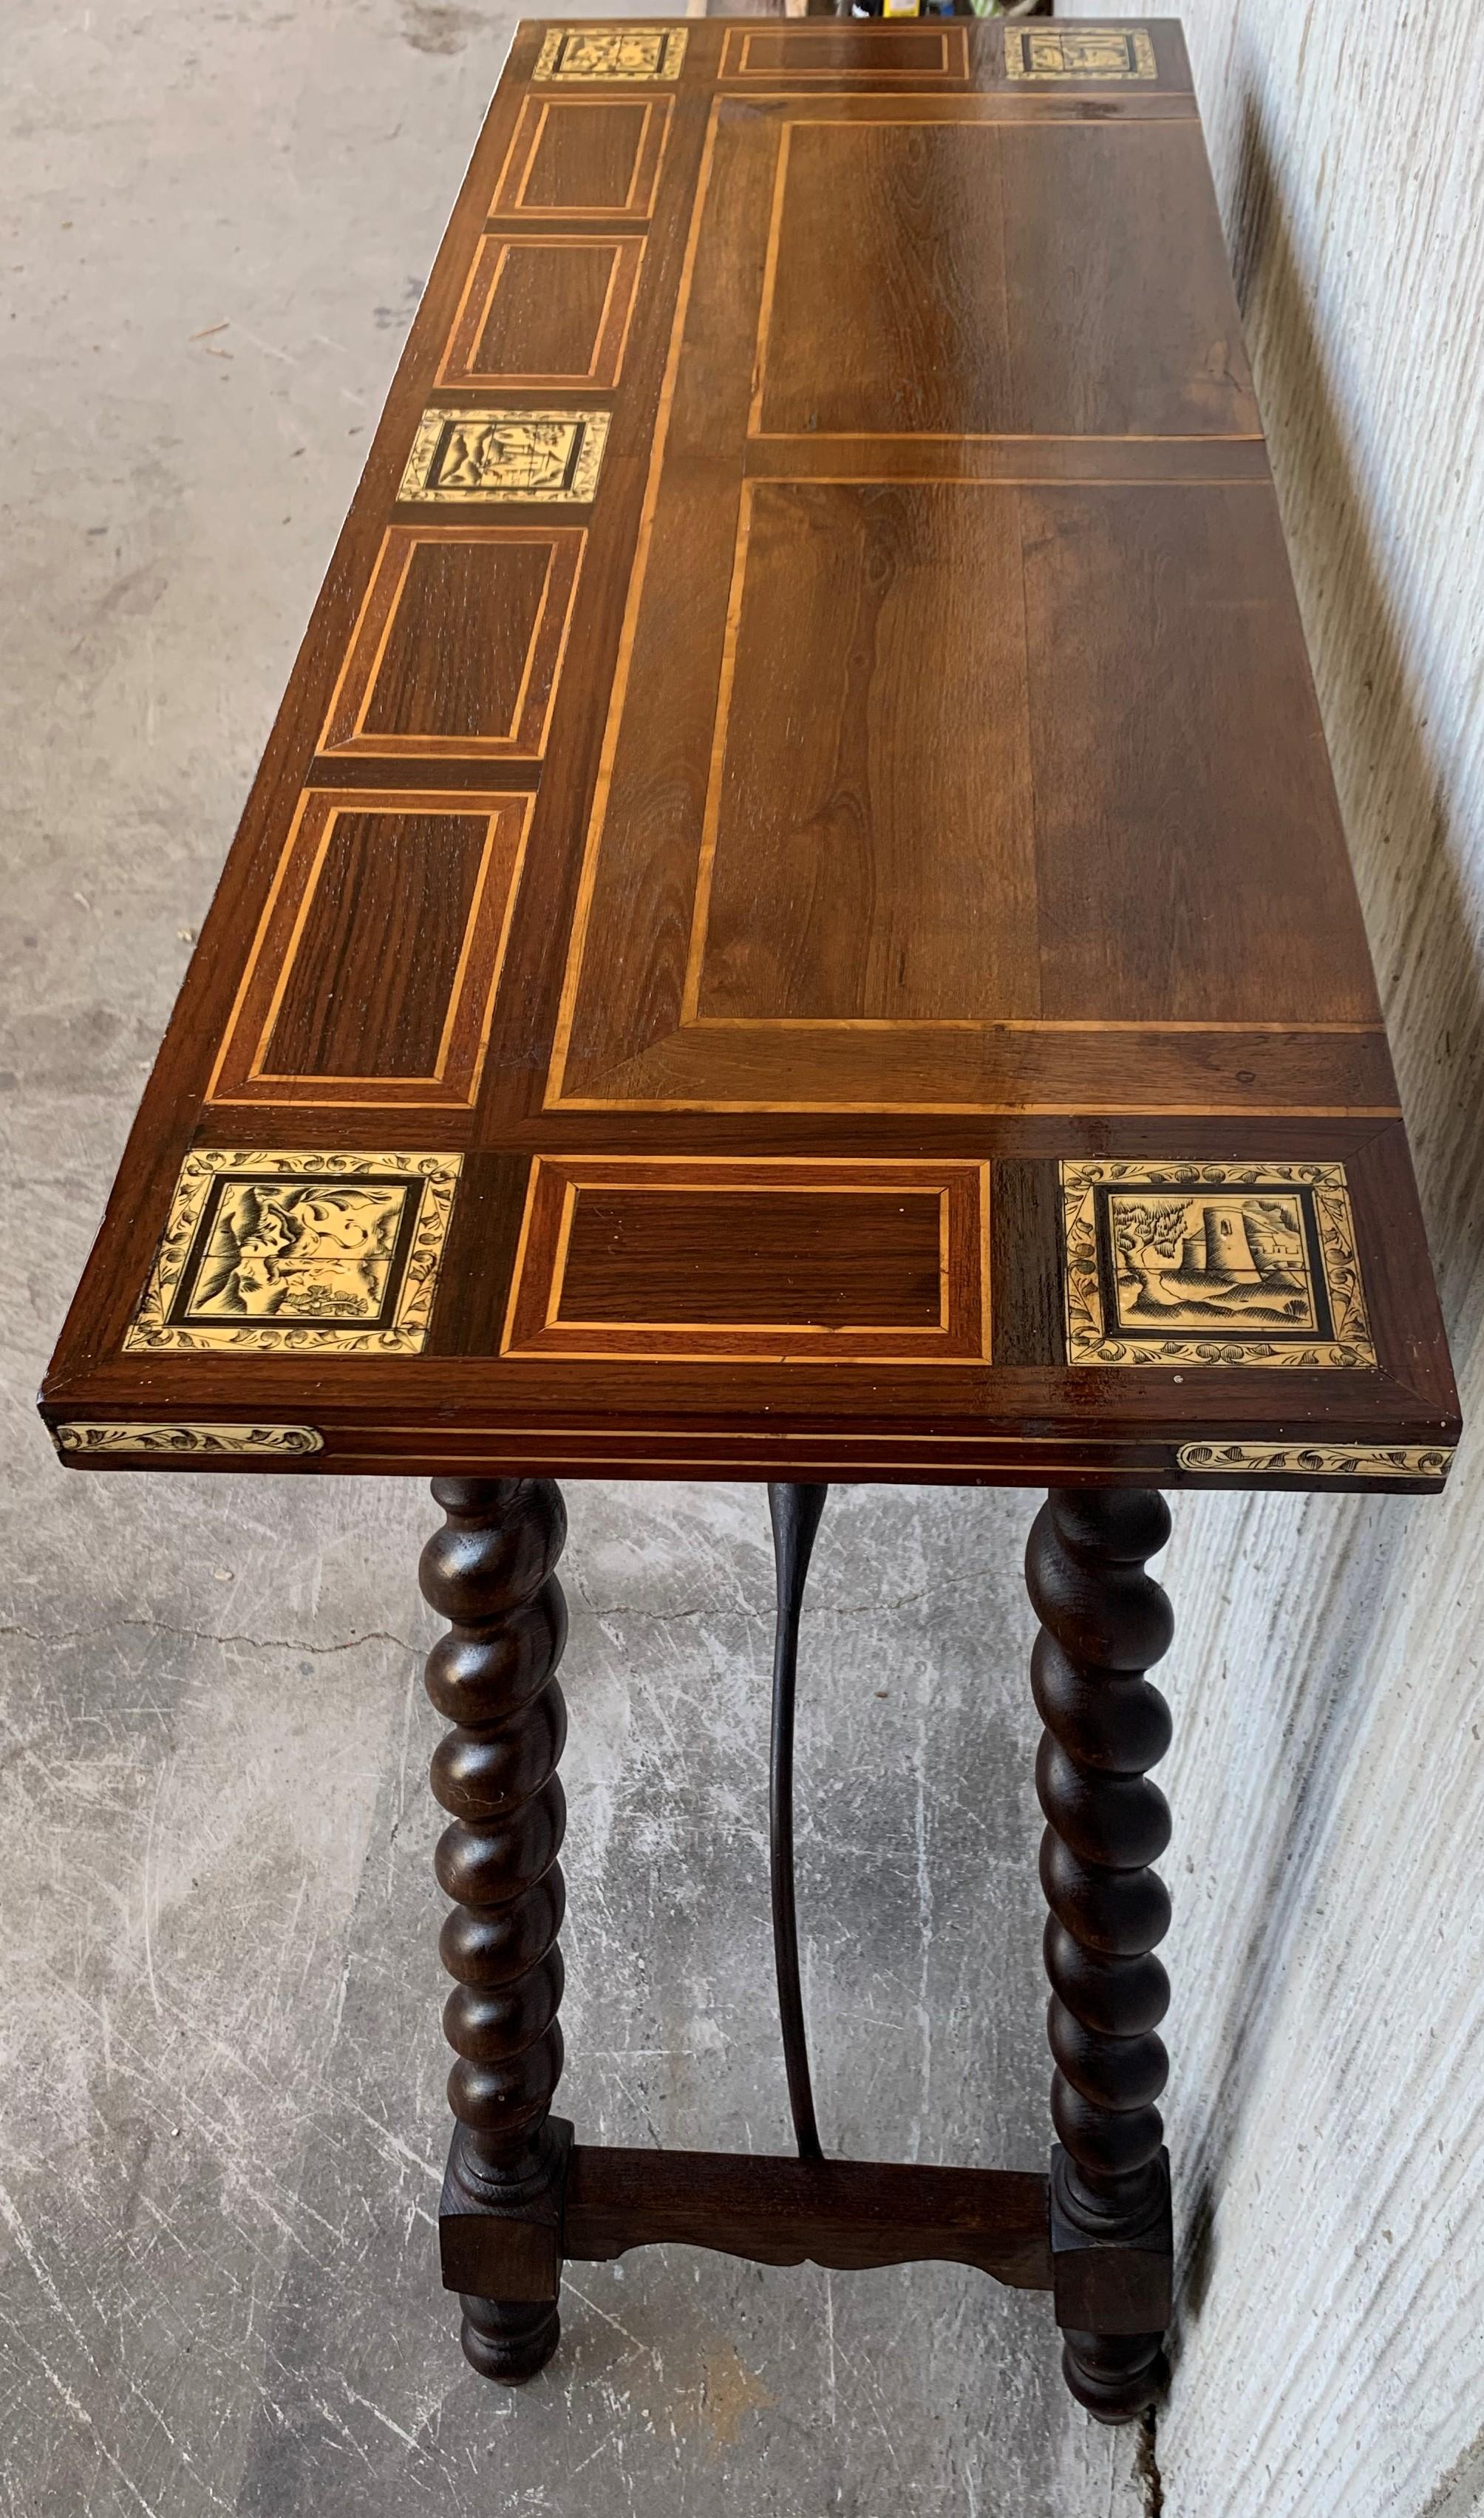 19th Century Salomonic Baroque Side Table with Inlays, Marquetry & Stretchers 1